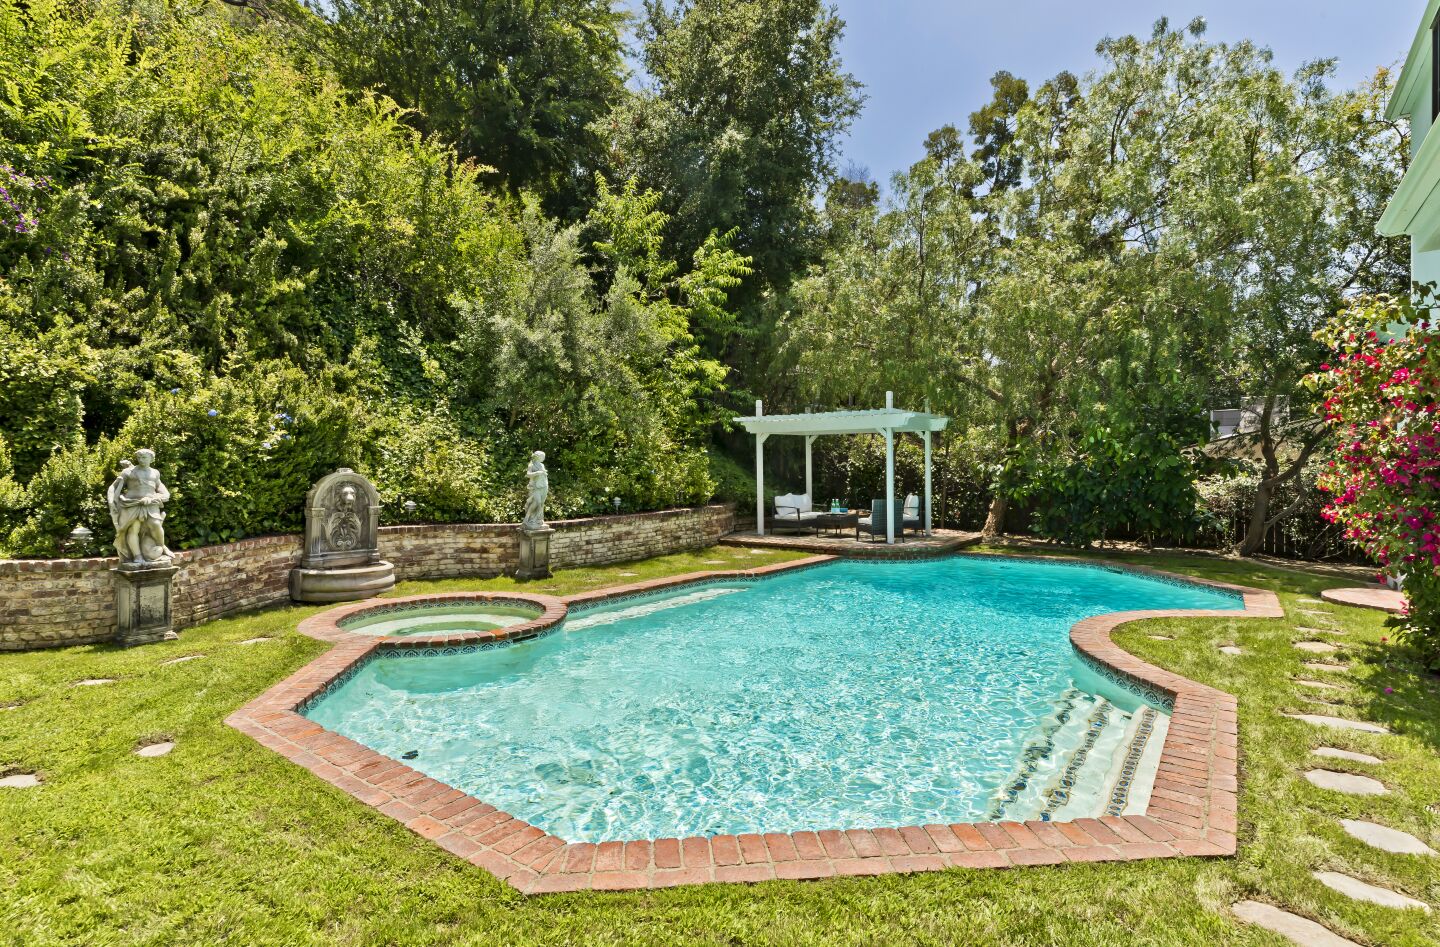 Brickwork surrounds a saltwater pool and spa in the backyard.